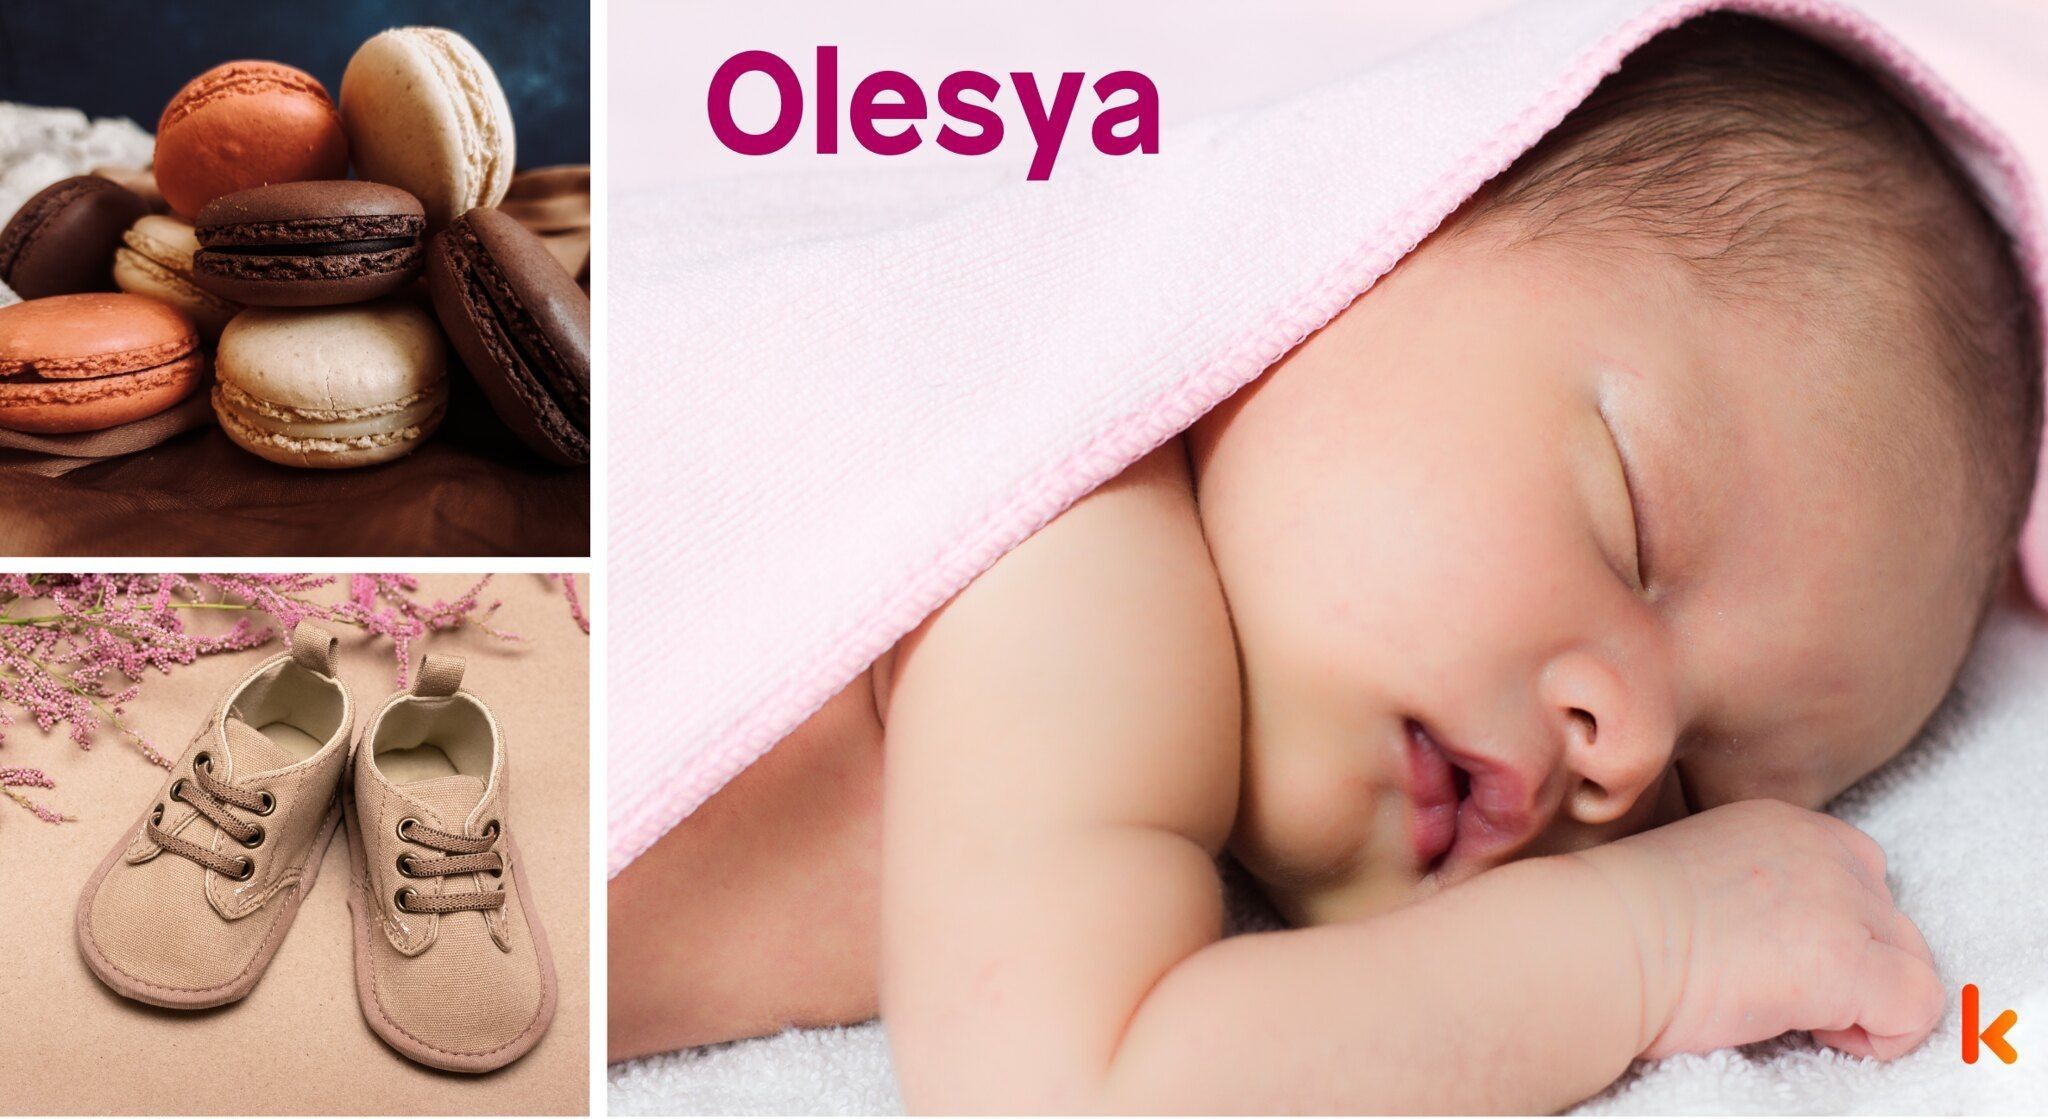 Meaning of the name Olesya